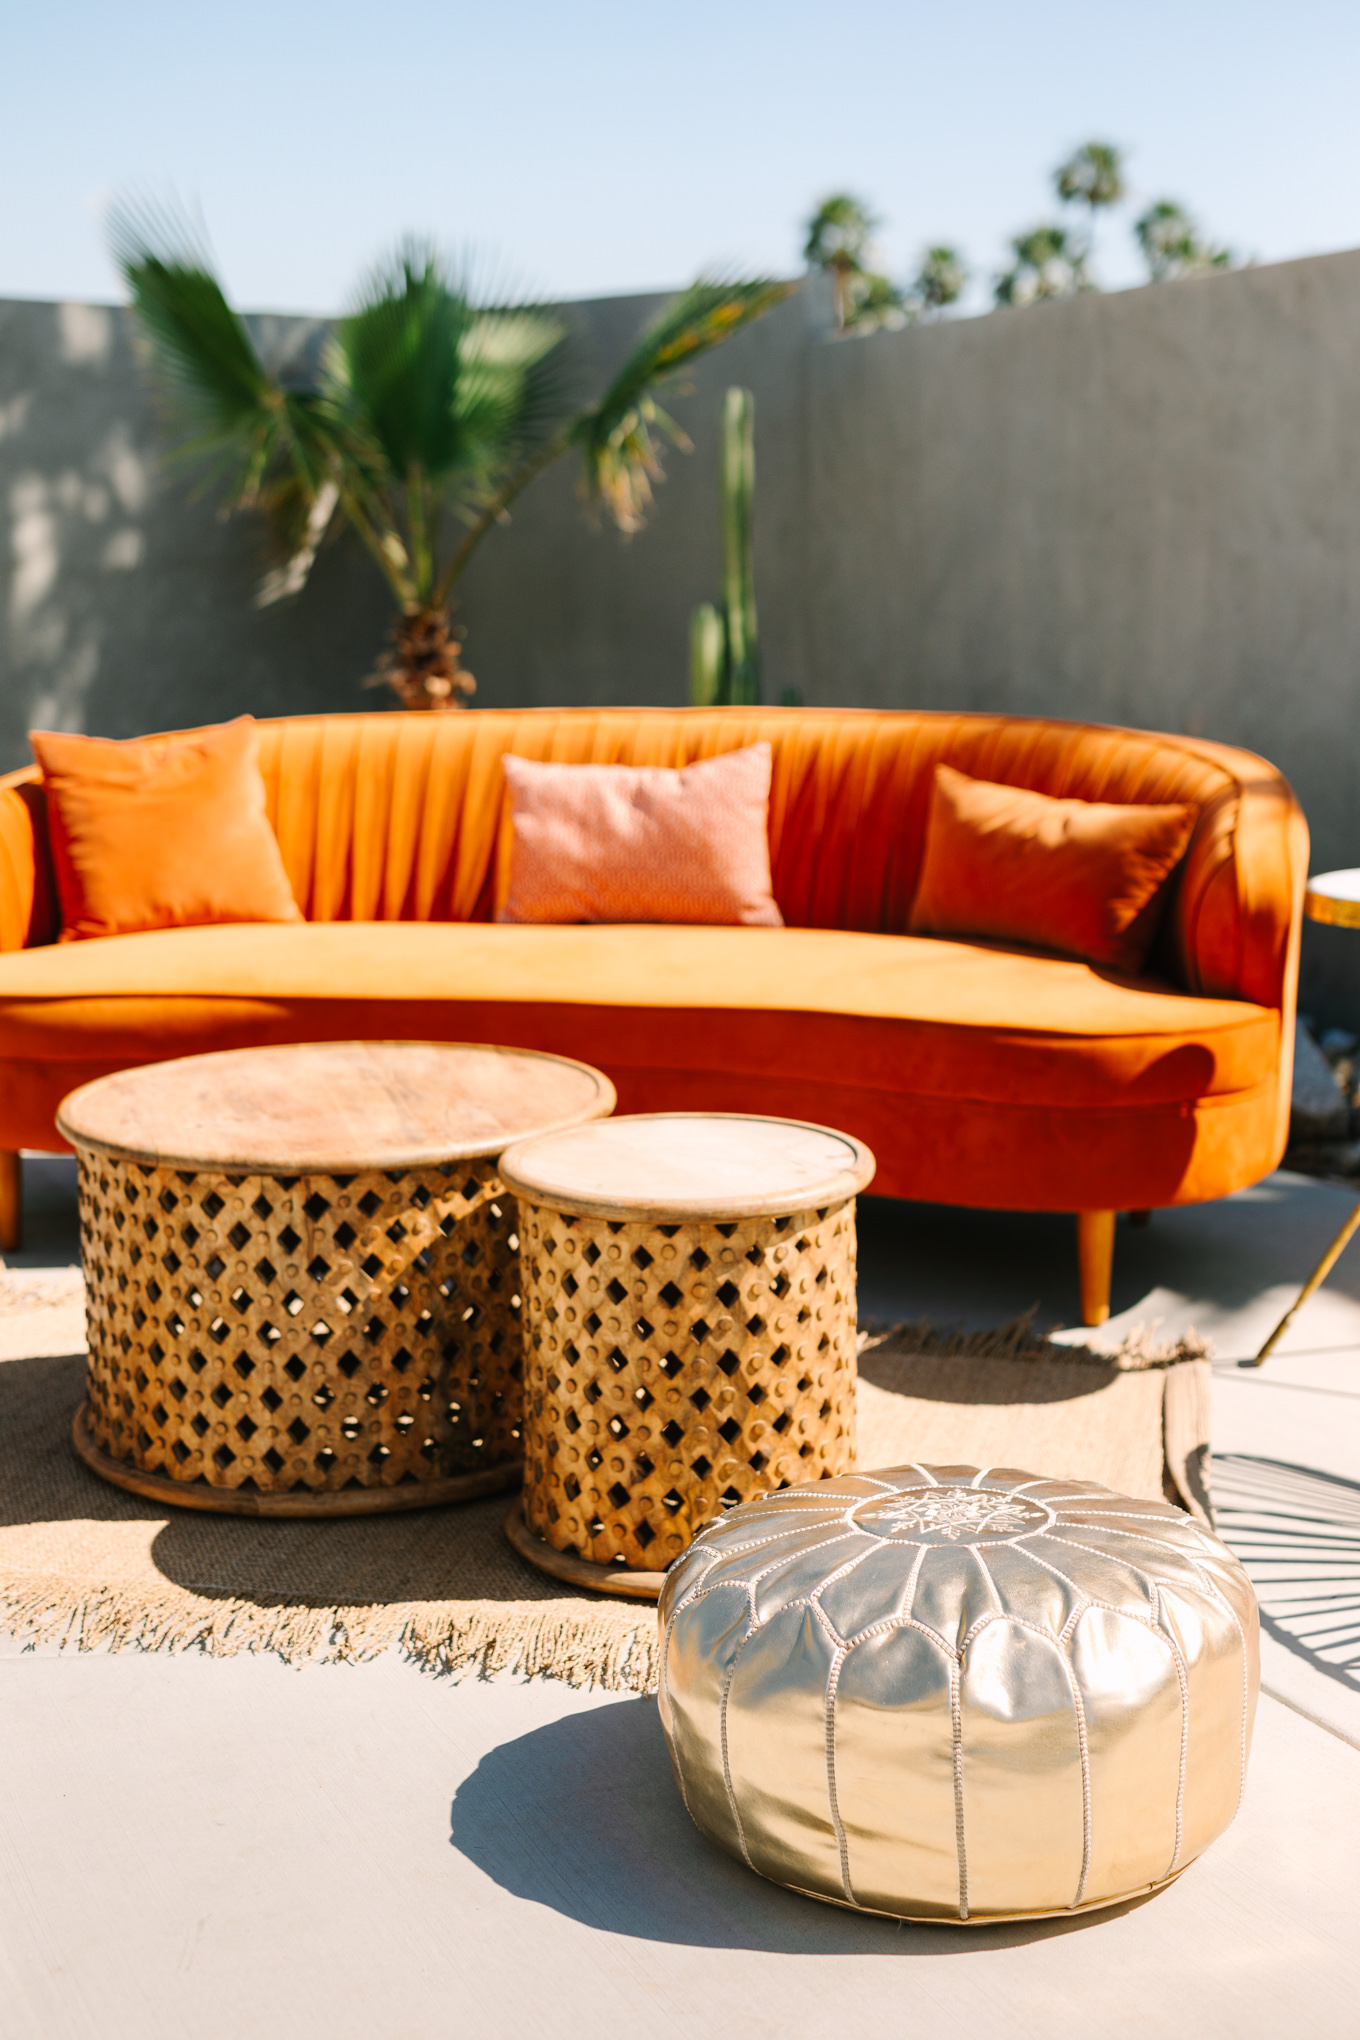 Gold boho pouf with velvet couch | Pink and orange Lautner Compound wedding | Colorful Palm Springs wedding photography | #palmspringsphotographer #palmspringswedding #lautnercompound #southerncaliforniawedding  Source: Mary Costa Photography | Los Angeles